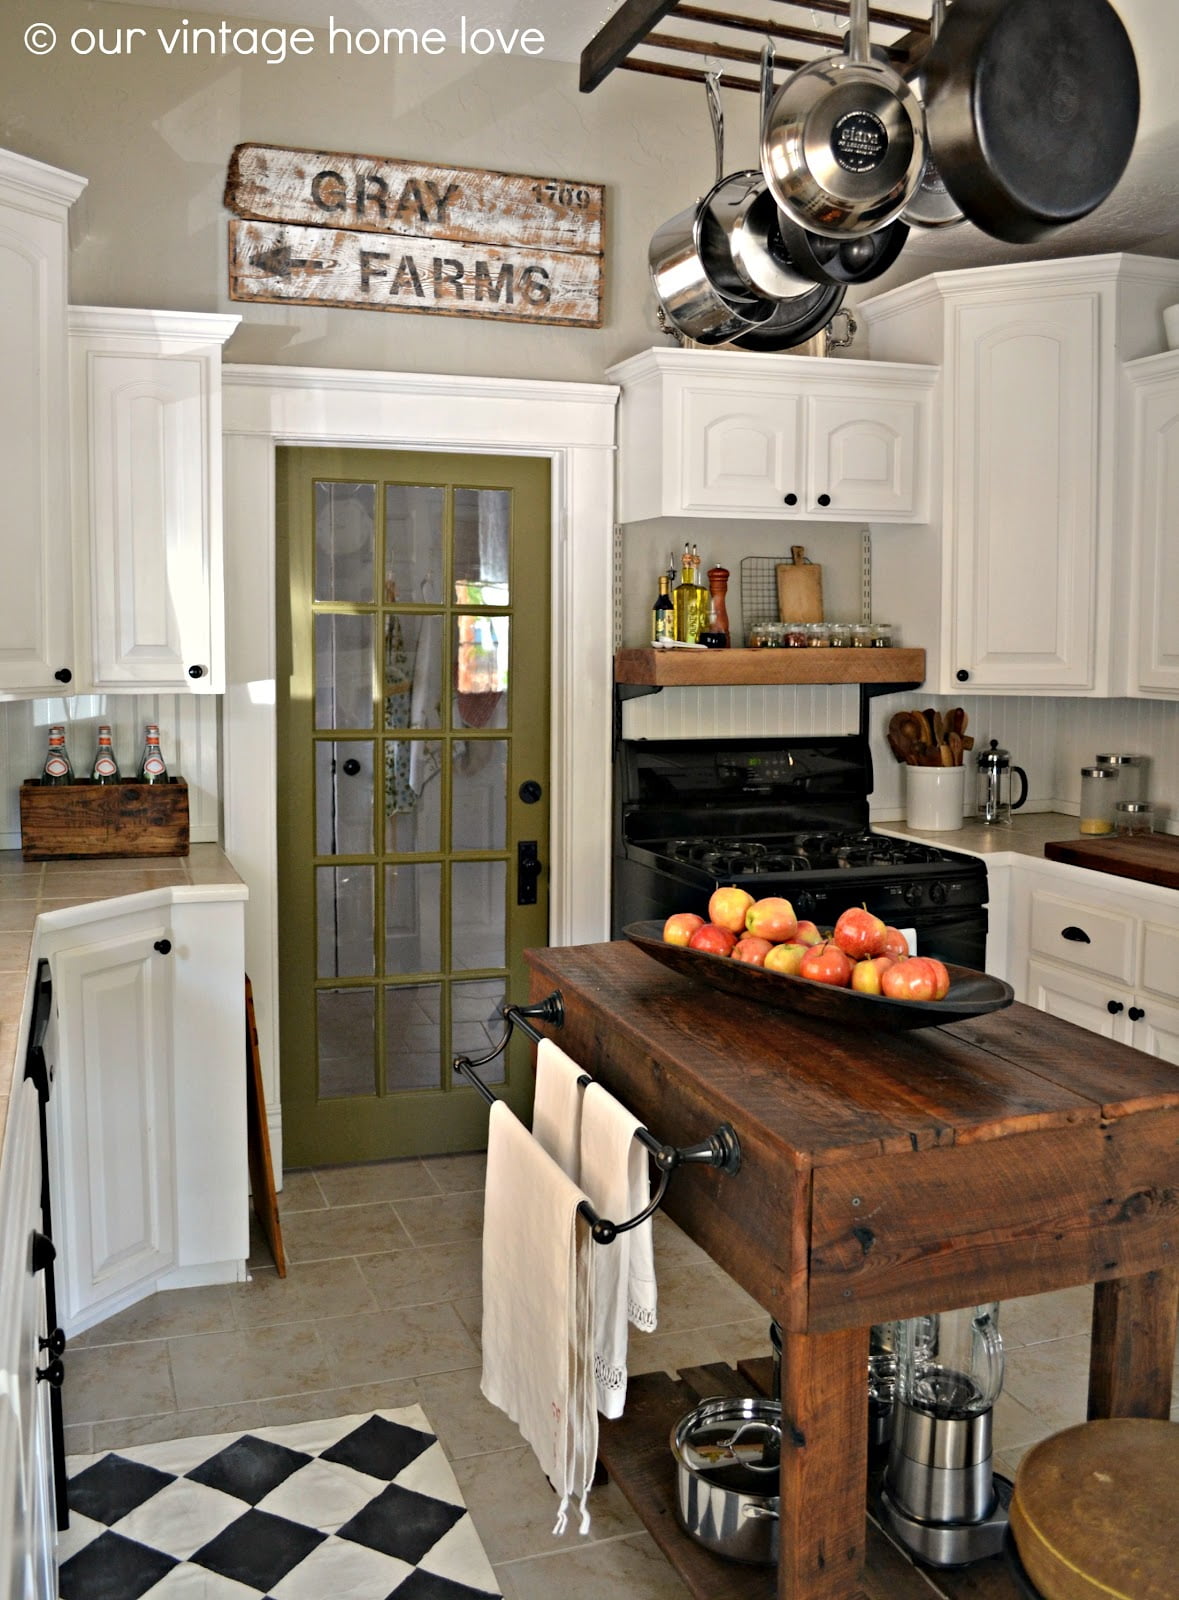 23 Best Rustic Country Kitchen Design Ideas and Decorations for 2021